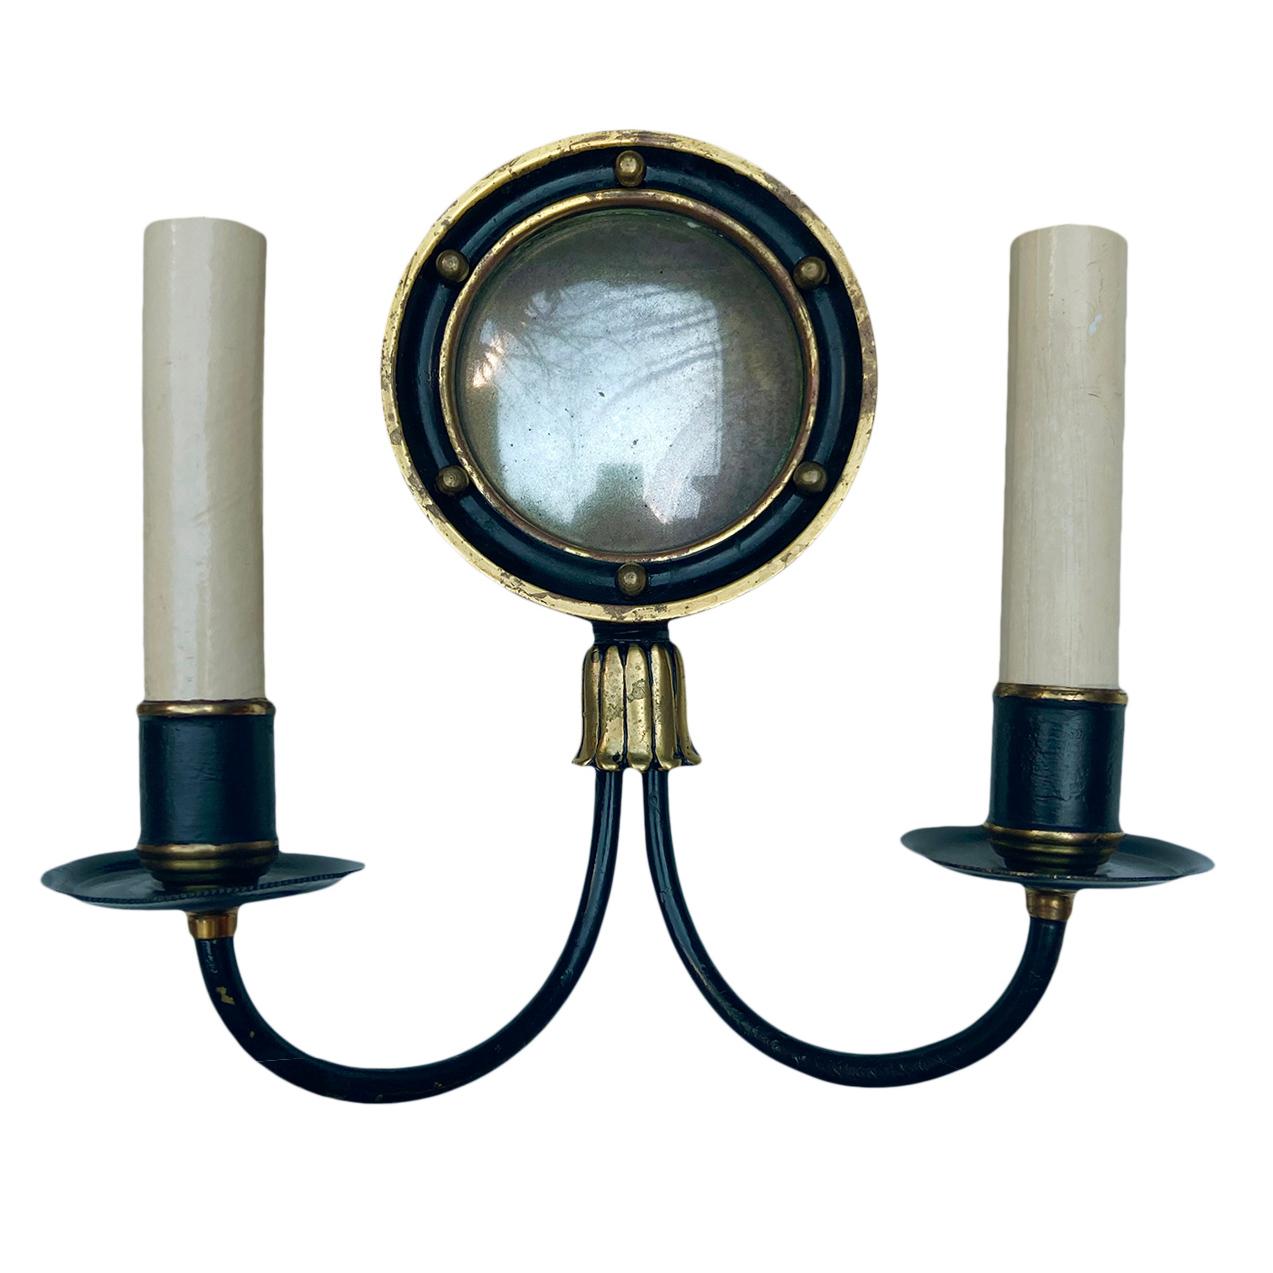 Pair of circa 1920's French sconces with mirrored backplates.

Measurements:
Height 8